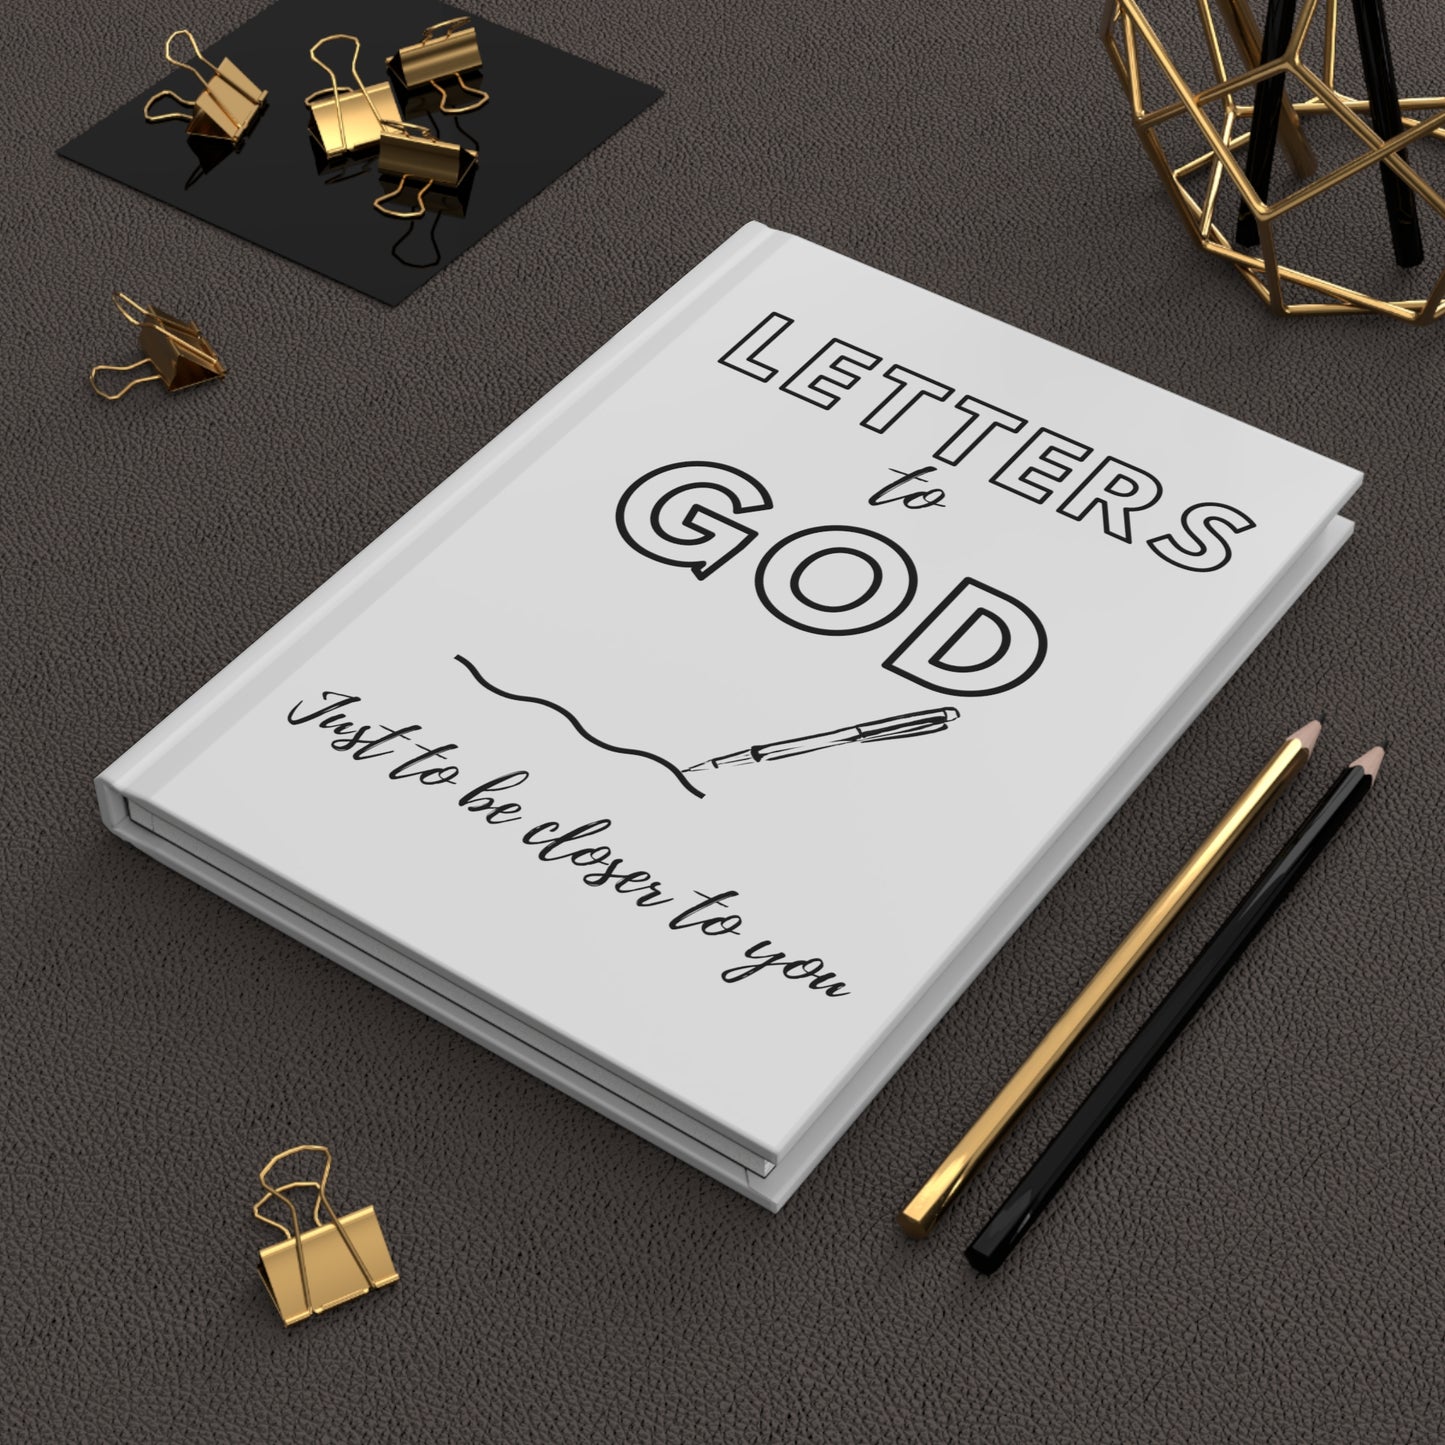 Letters to God - Hardcover Journal Matte